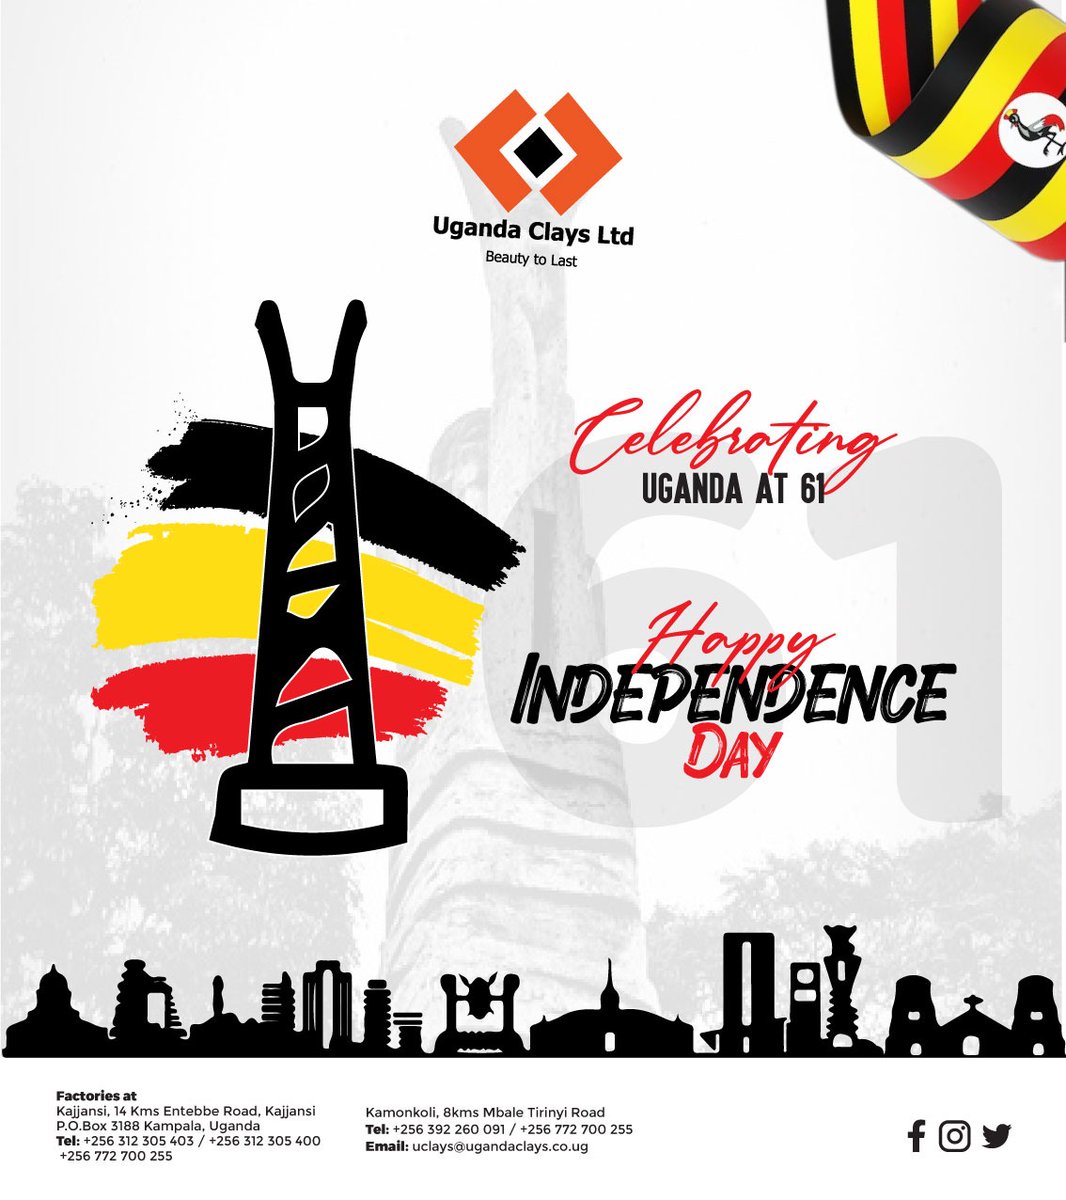 It takes immense dedication and hard work to take a country to new heights and together we can make it happen. Happy Independence Day to our esteemed customers.